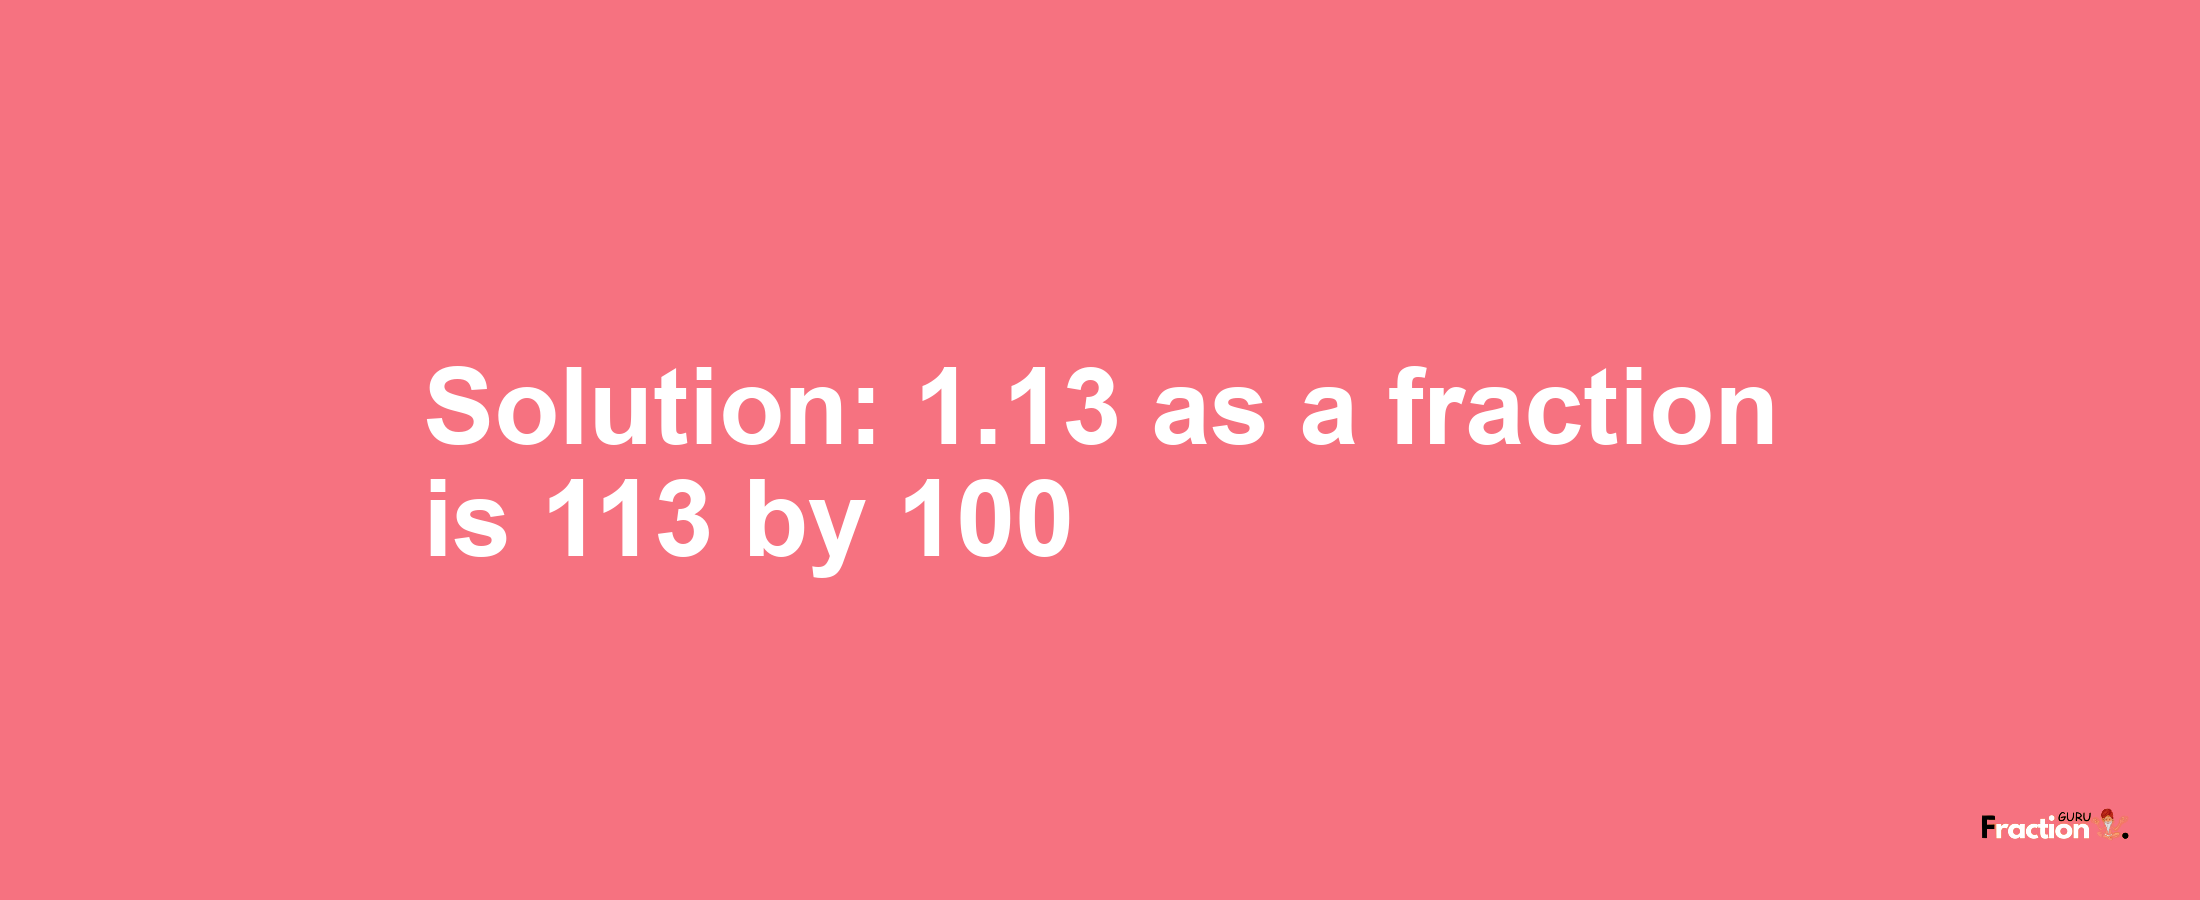 Solution:1.13 as a fraction is 113/100